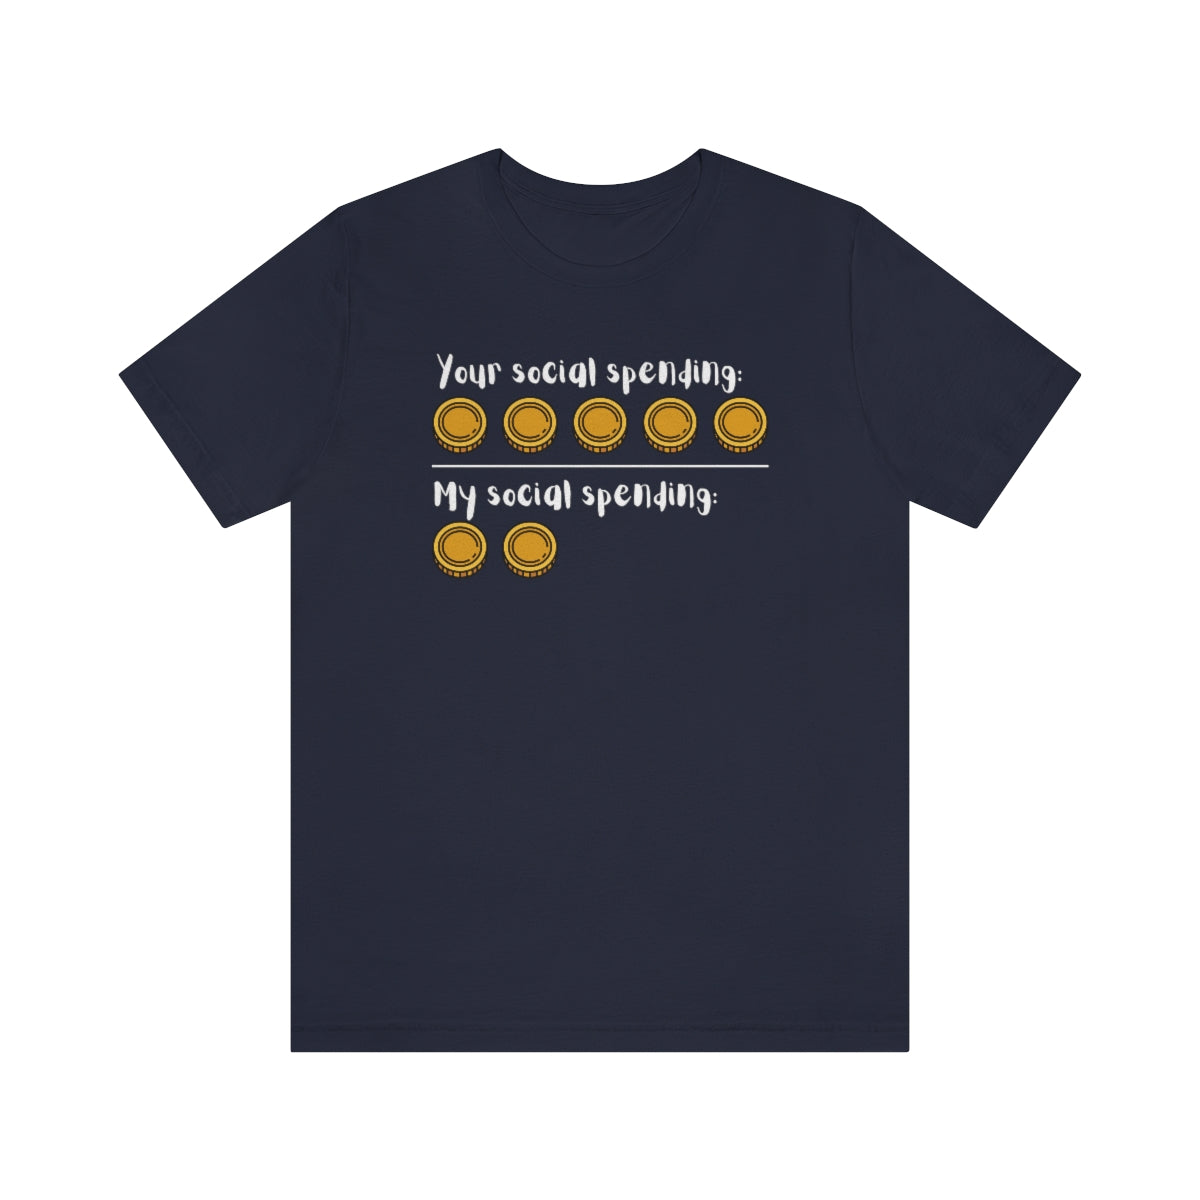 A navy shirt with the text "Your social spending" with 5 coins  and "my social spending" with 2 coins